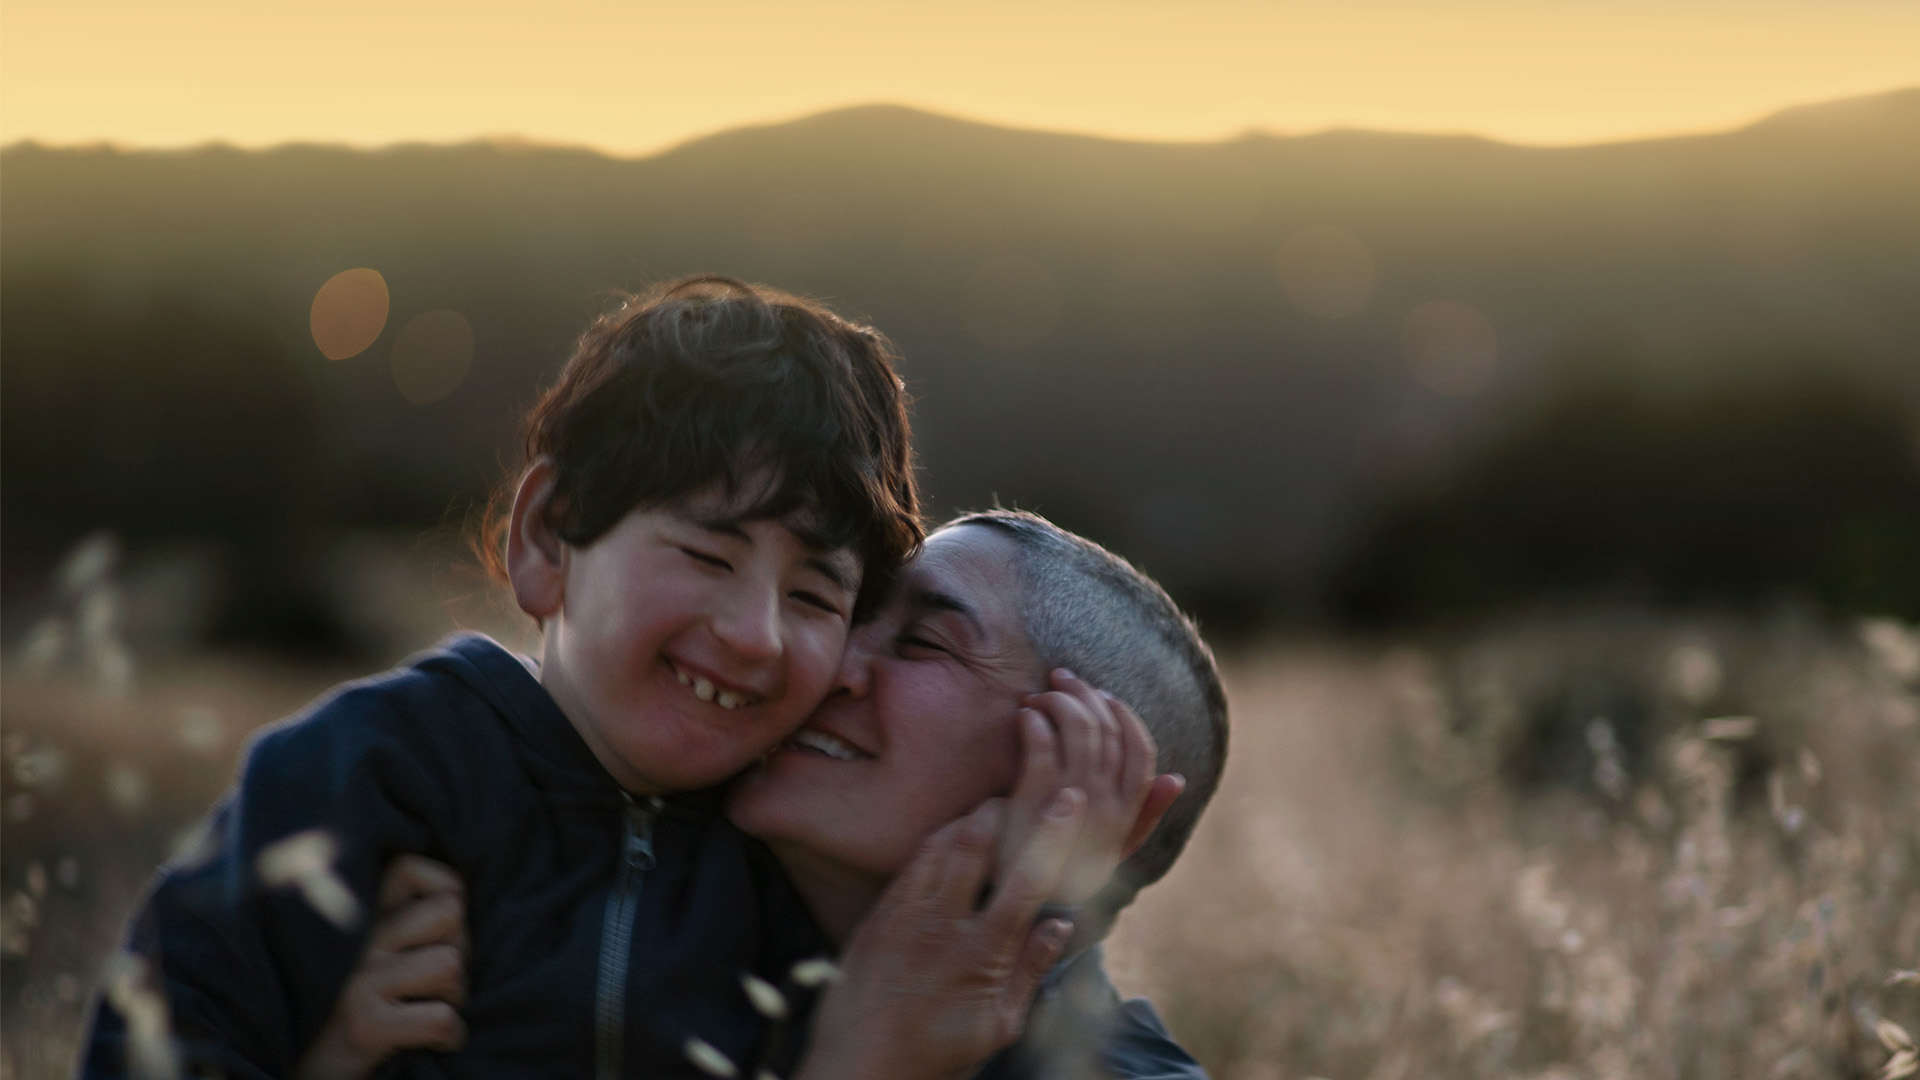 Young boy with dark brown hair smiles and touches face of woman with buzzed hair in golden landscape